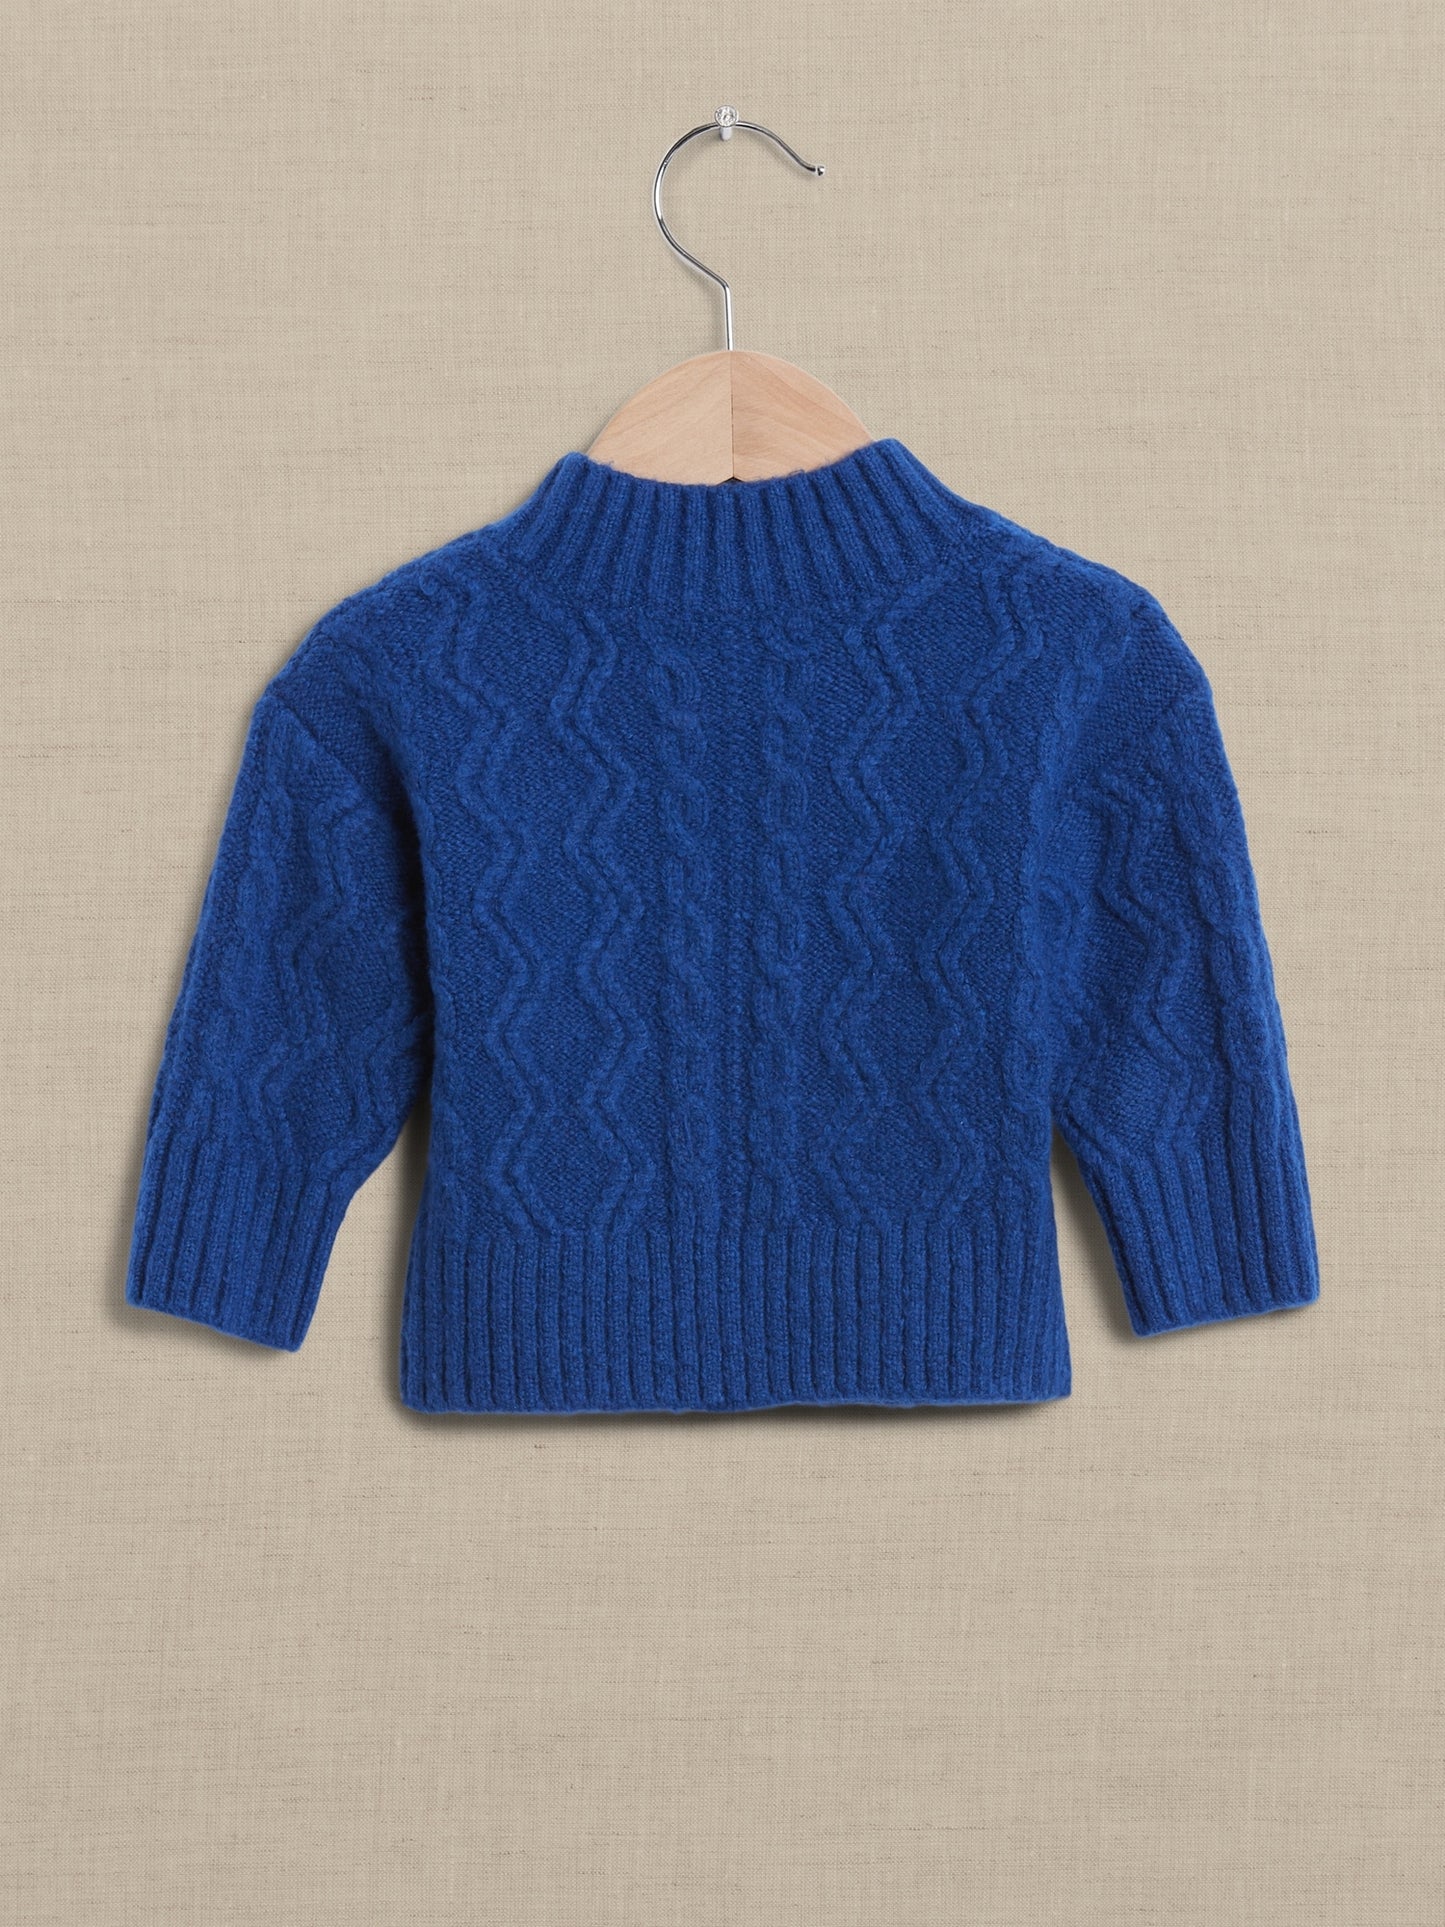 Cotton-Blend Sweater for Baby + Toddler